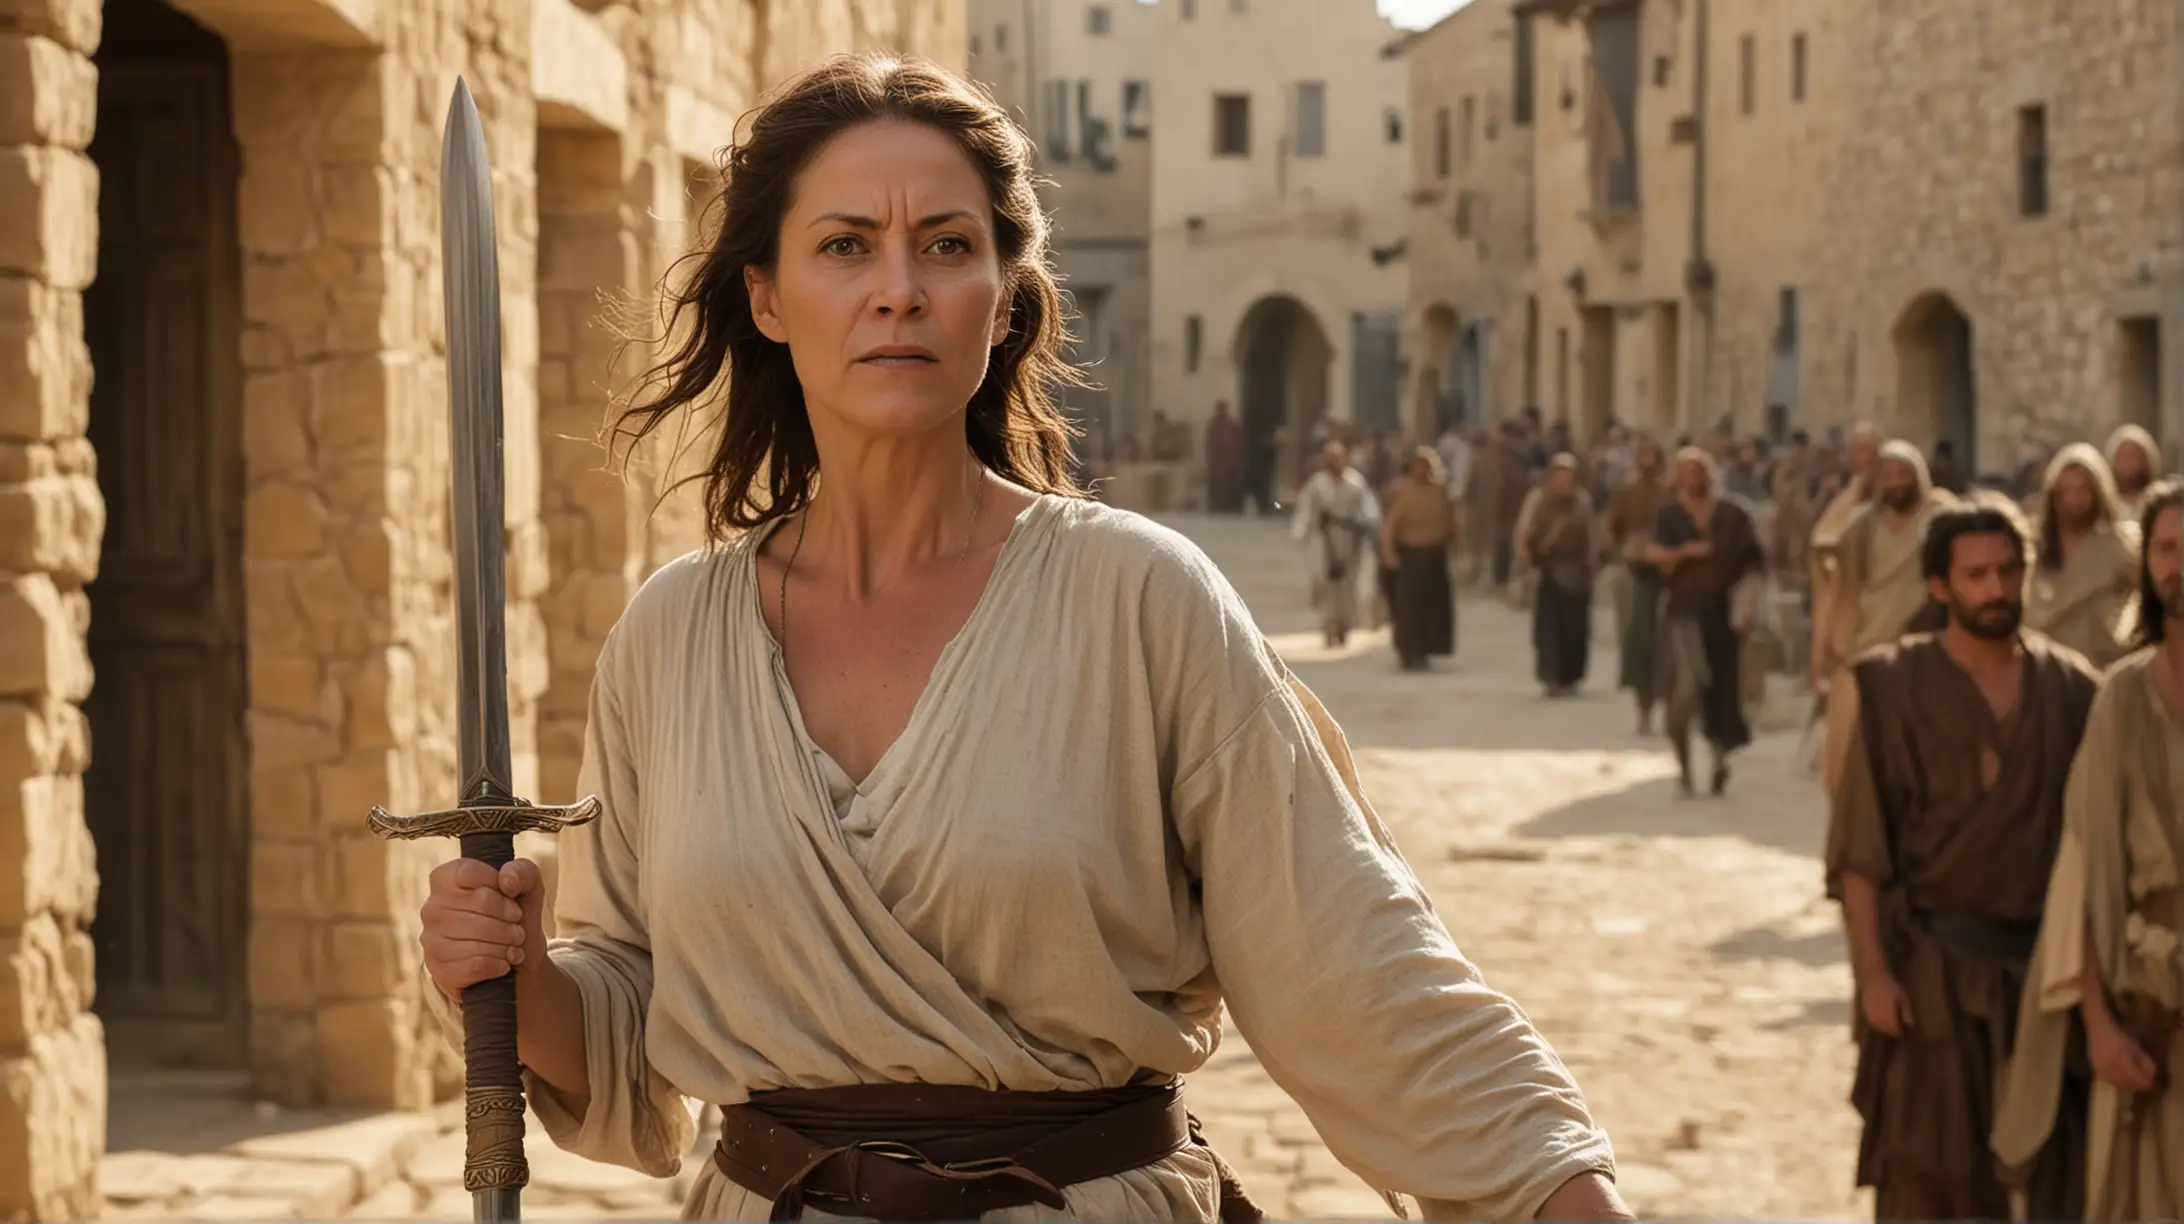 A middle aged woman with a sword. Set in a town location with some men in the background. Set during the Biblical era of King Solomon.